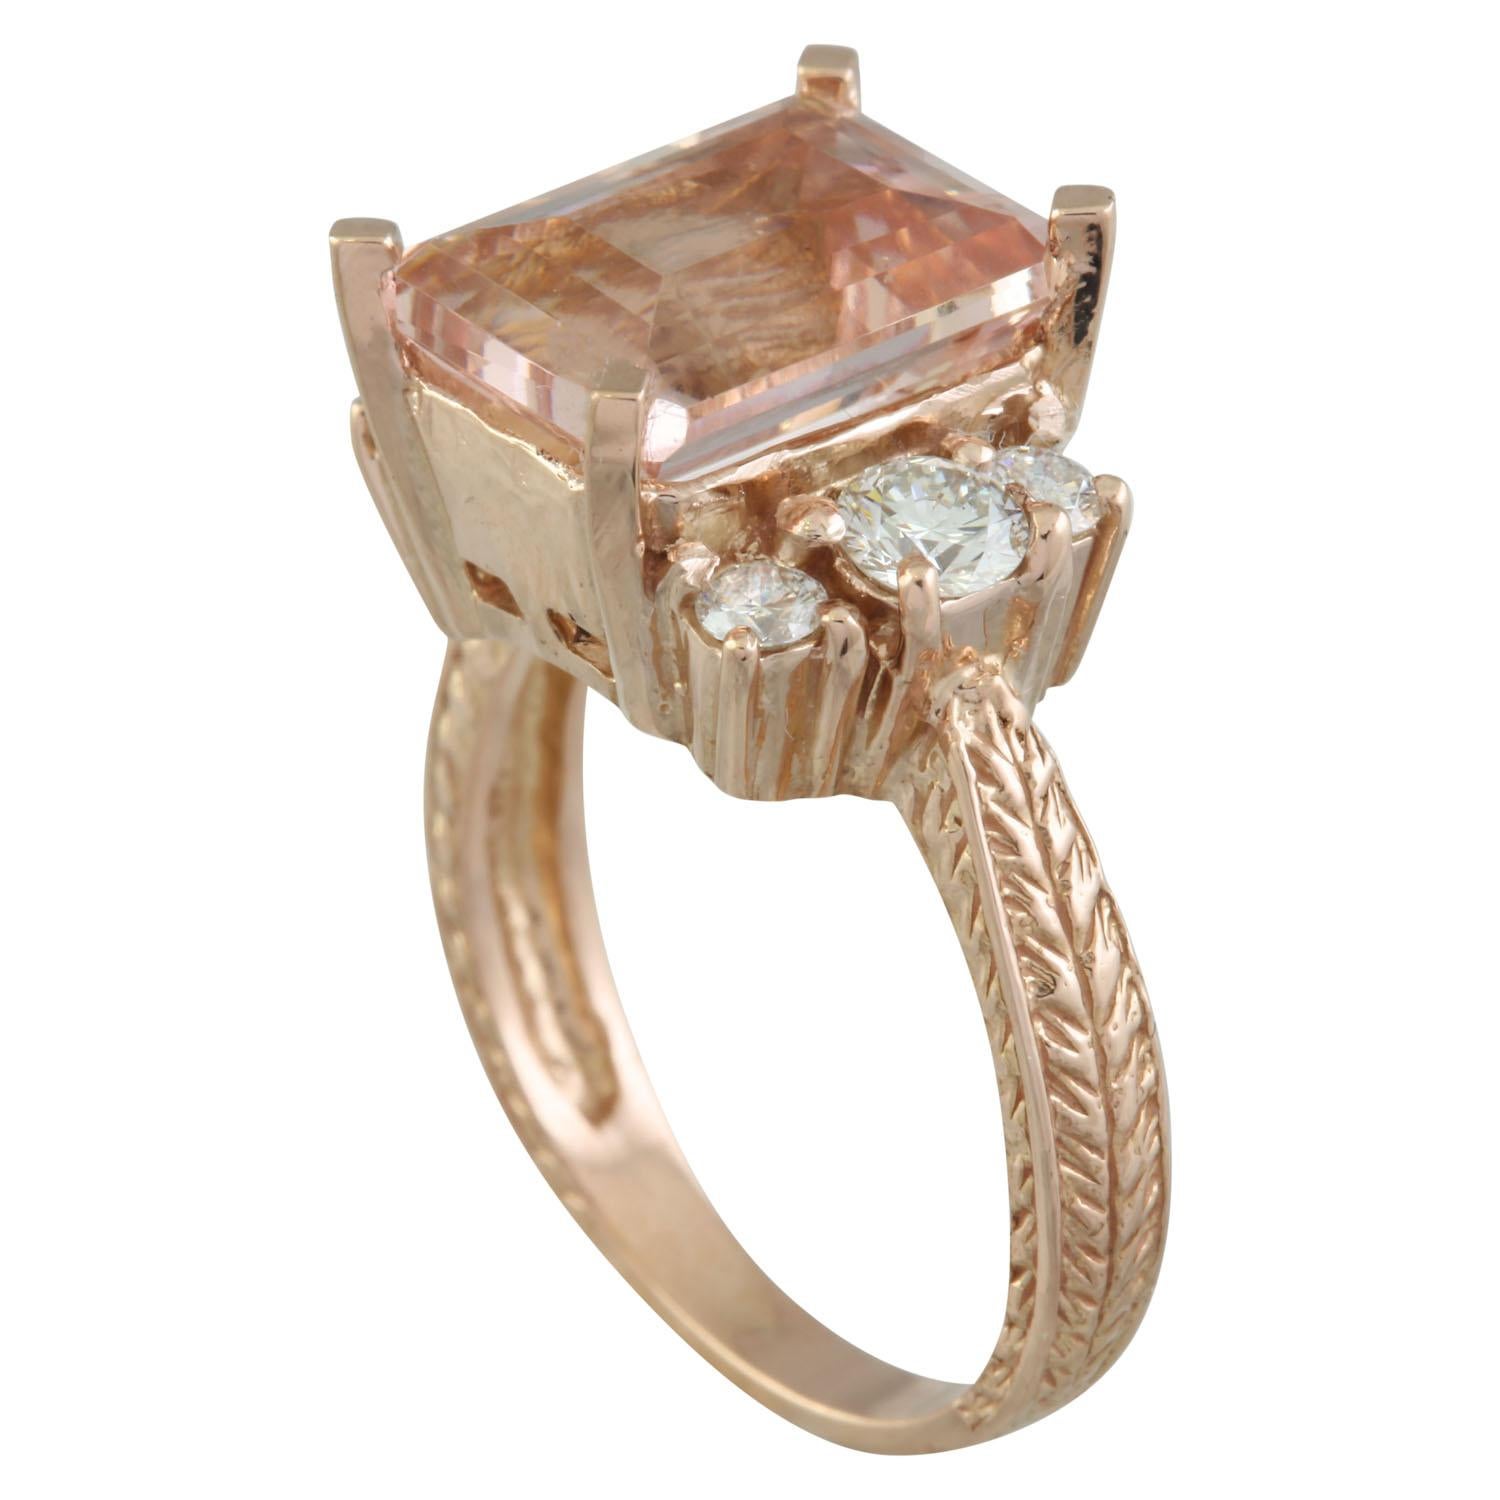 5.30 Carat Natural Morganite 14 Karat Solid Rose Gold Diamond Ring
Stamped: 14K 
Ring Size: 7 
Total Ring Weight: 7.5 Grams 
Morganite Weight: 4.60 Carat (11.00x9.00 Millimeter) 
Diamond Weight: 0.70 Carat (F-G Color, VS2-SI1 Clarity) 
Quantity: